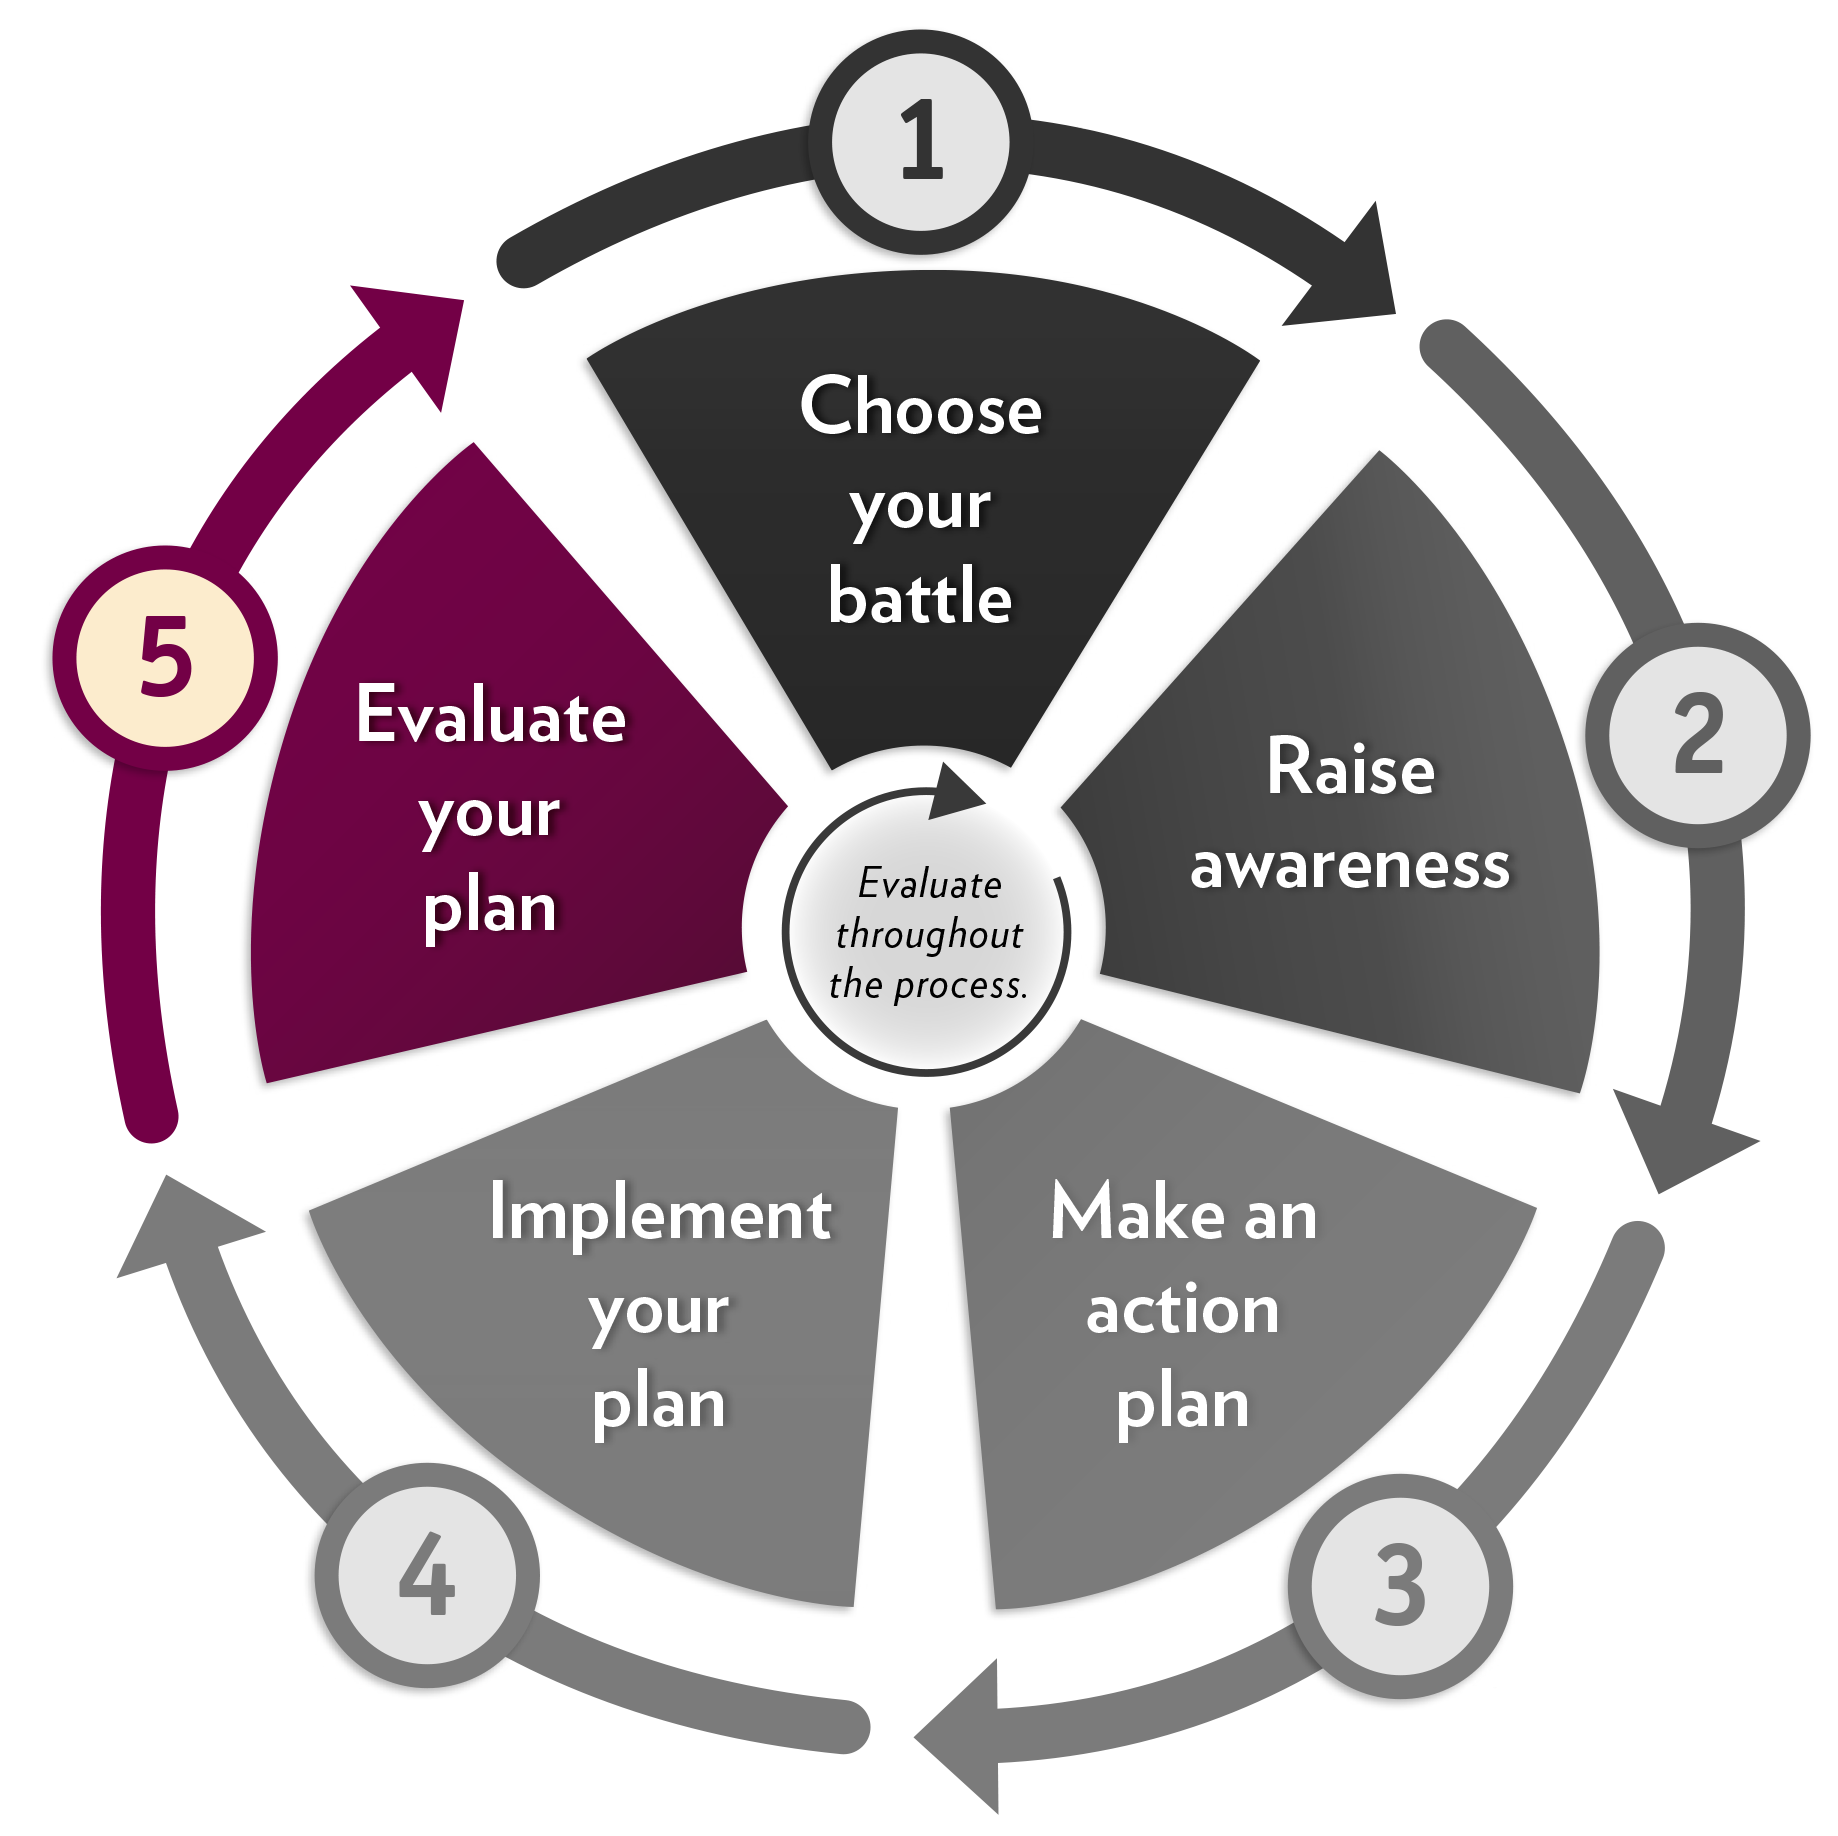 Phases of Evaluation Planning